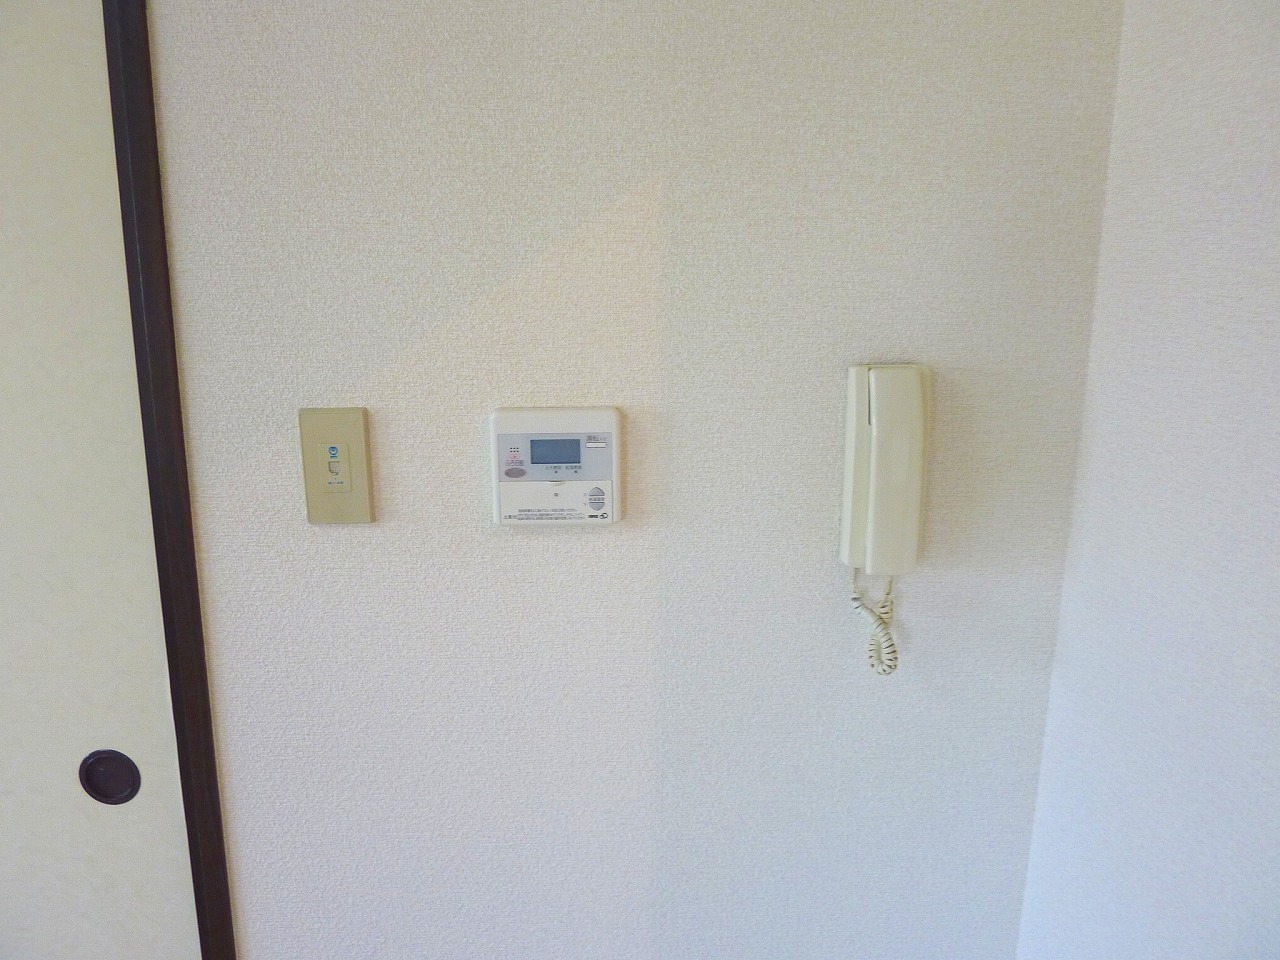 Security. It comes with intercom